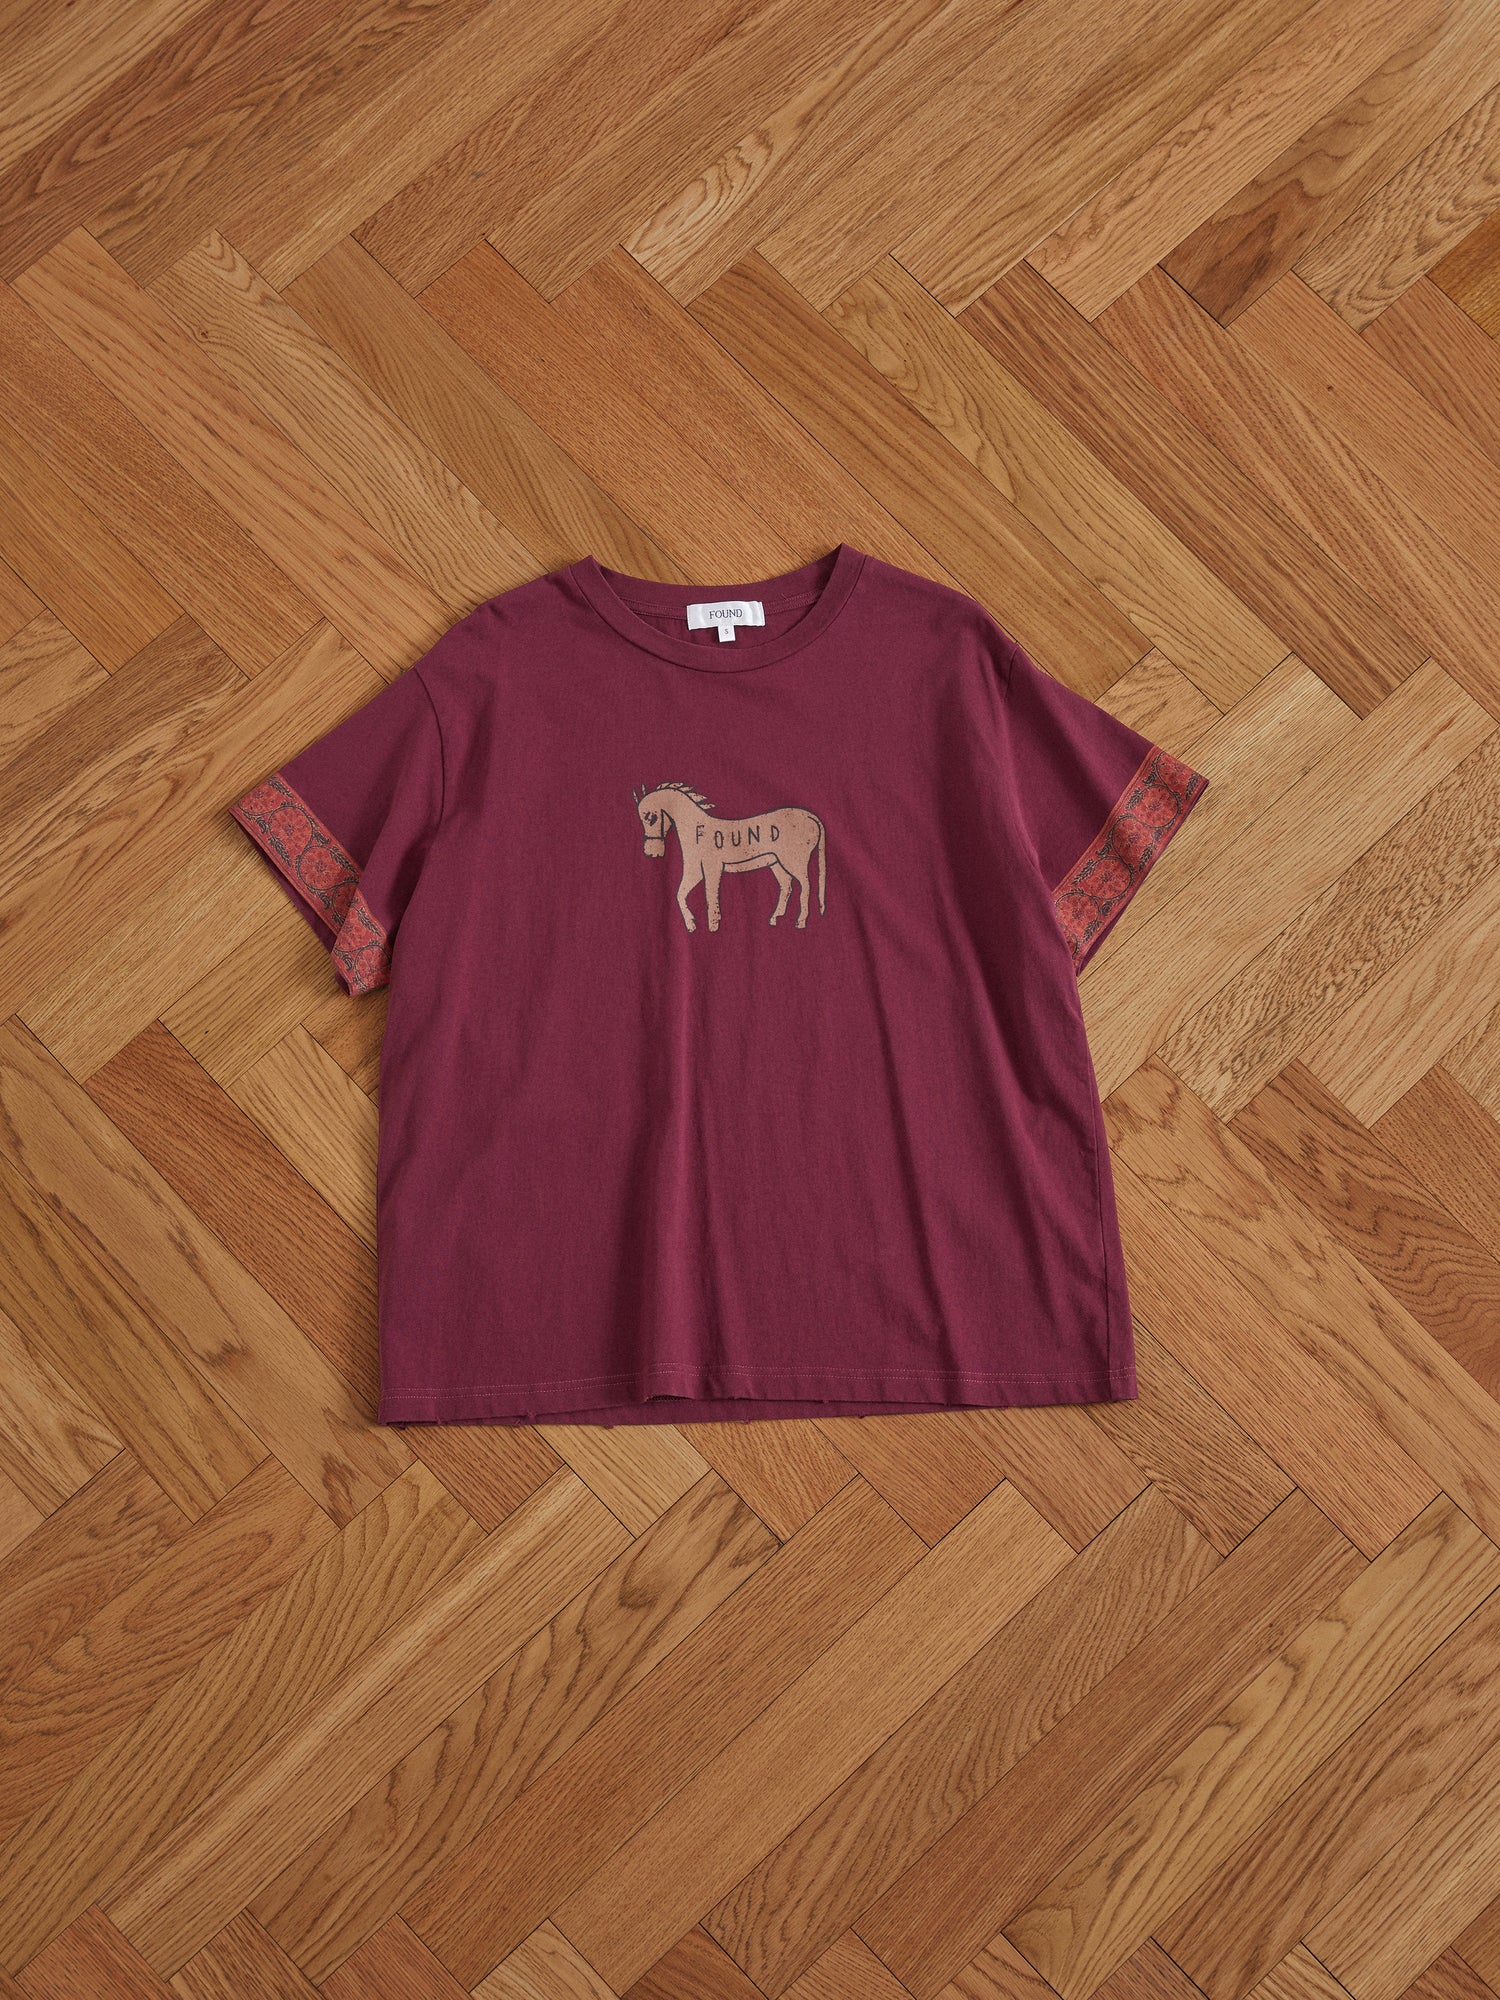 A maroon Found Horse Embellishment tee with a horse on it.